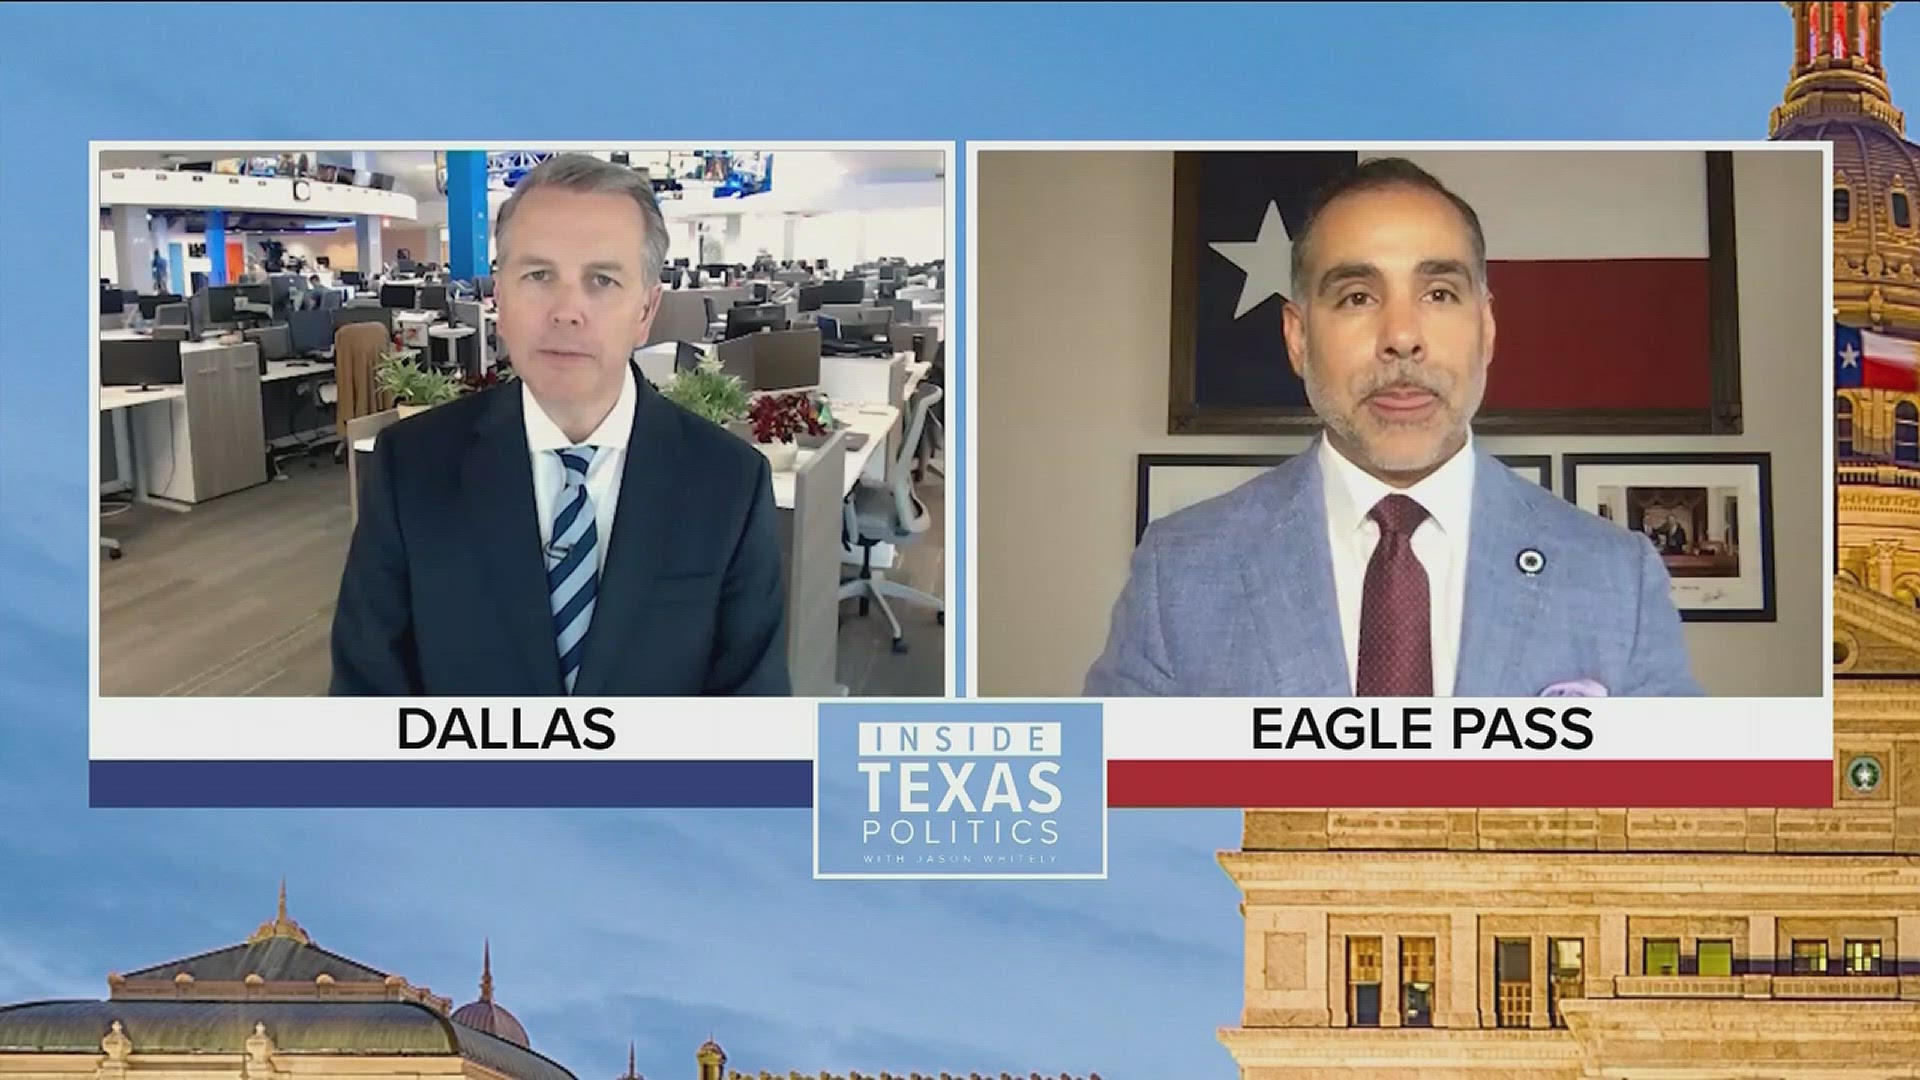 State Rep. Eddie Morales was the only democratic joint author of the bill that started Operation Lone Star, Gov. Greg Abbott’s controversial border security plan.